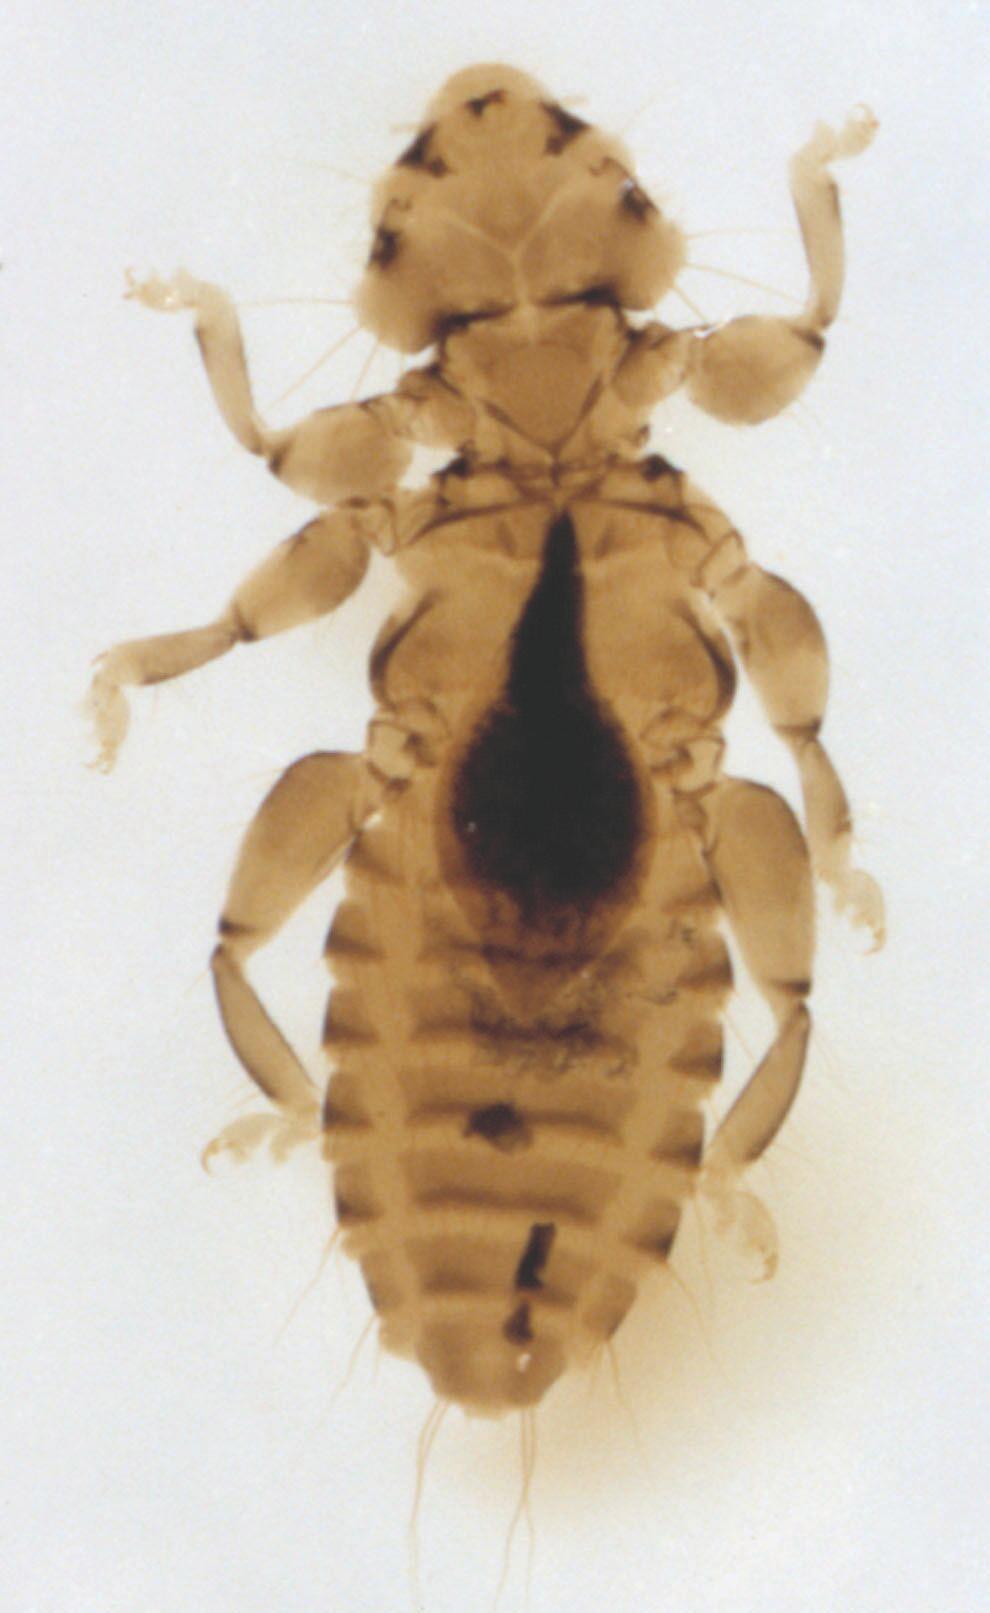 Chicken Head Louse The chicken head louse constantly nibbles at the skin scales (Figure 3) and is a serious pest of young chickens and turkeys. It is frequently found on the head and neck of poultry.